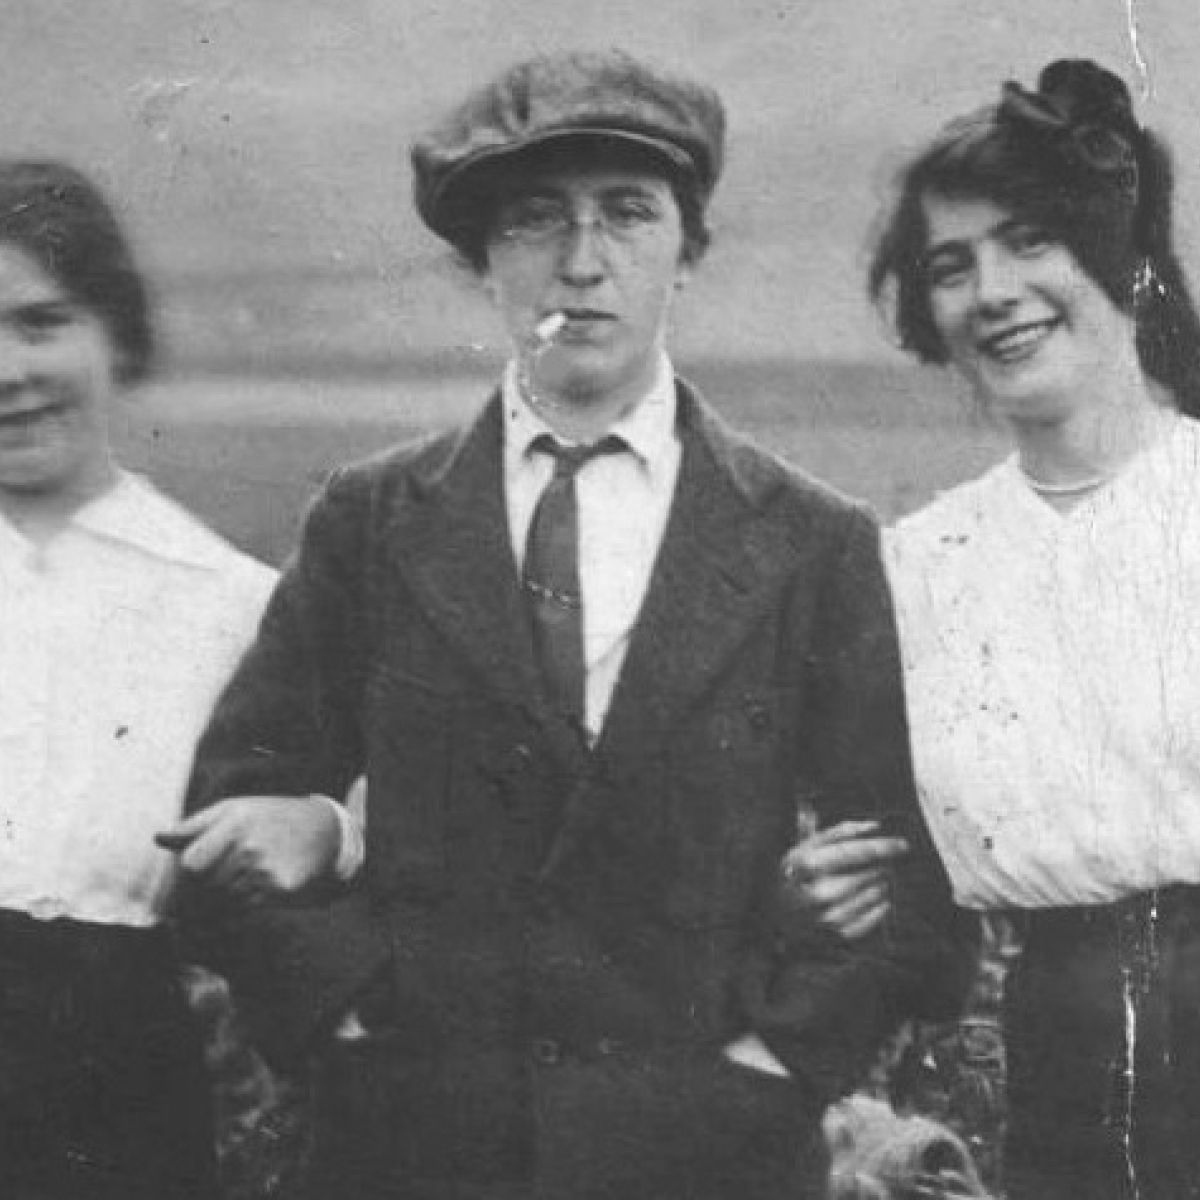 Schoolteacher, Irish revolutionary and feminist Margaret Skinnider (center) was born May 28, 1892. A sniper in the 1916 Easter Uprising, she was herself shot three times, making her the only woman combatant wounded in the uprising. #OTD #Ireland